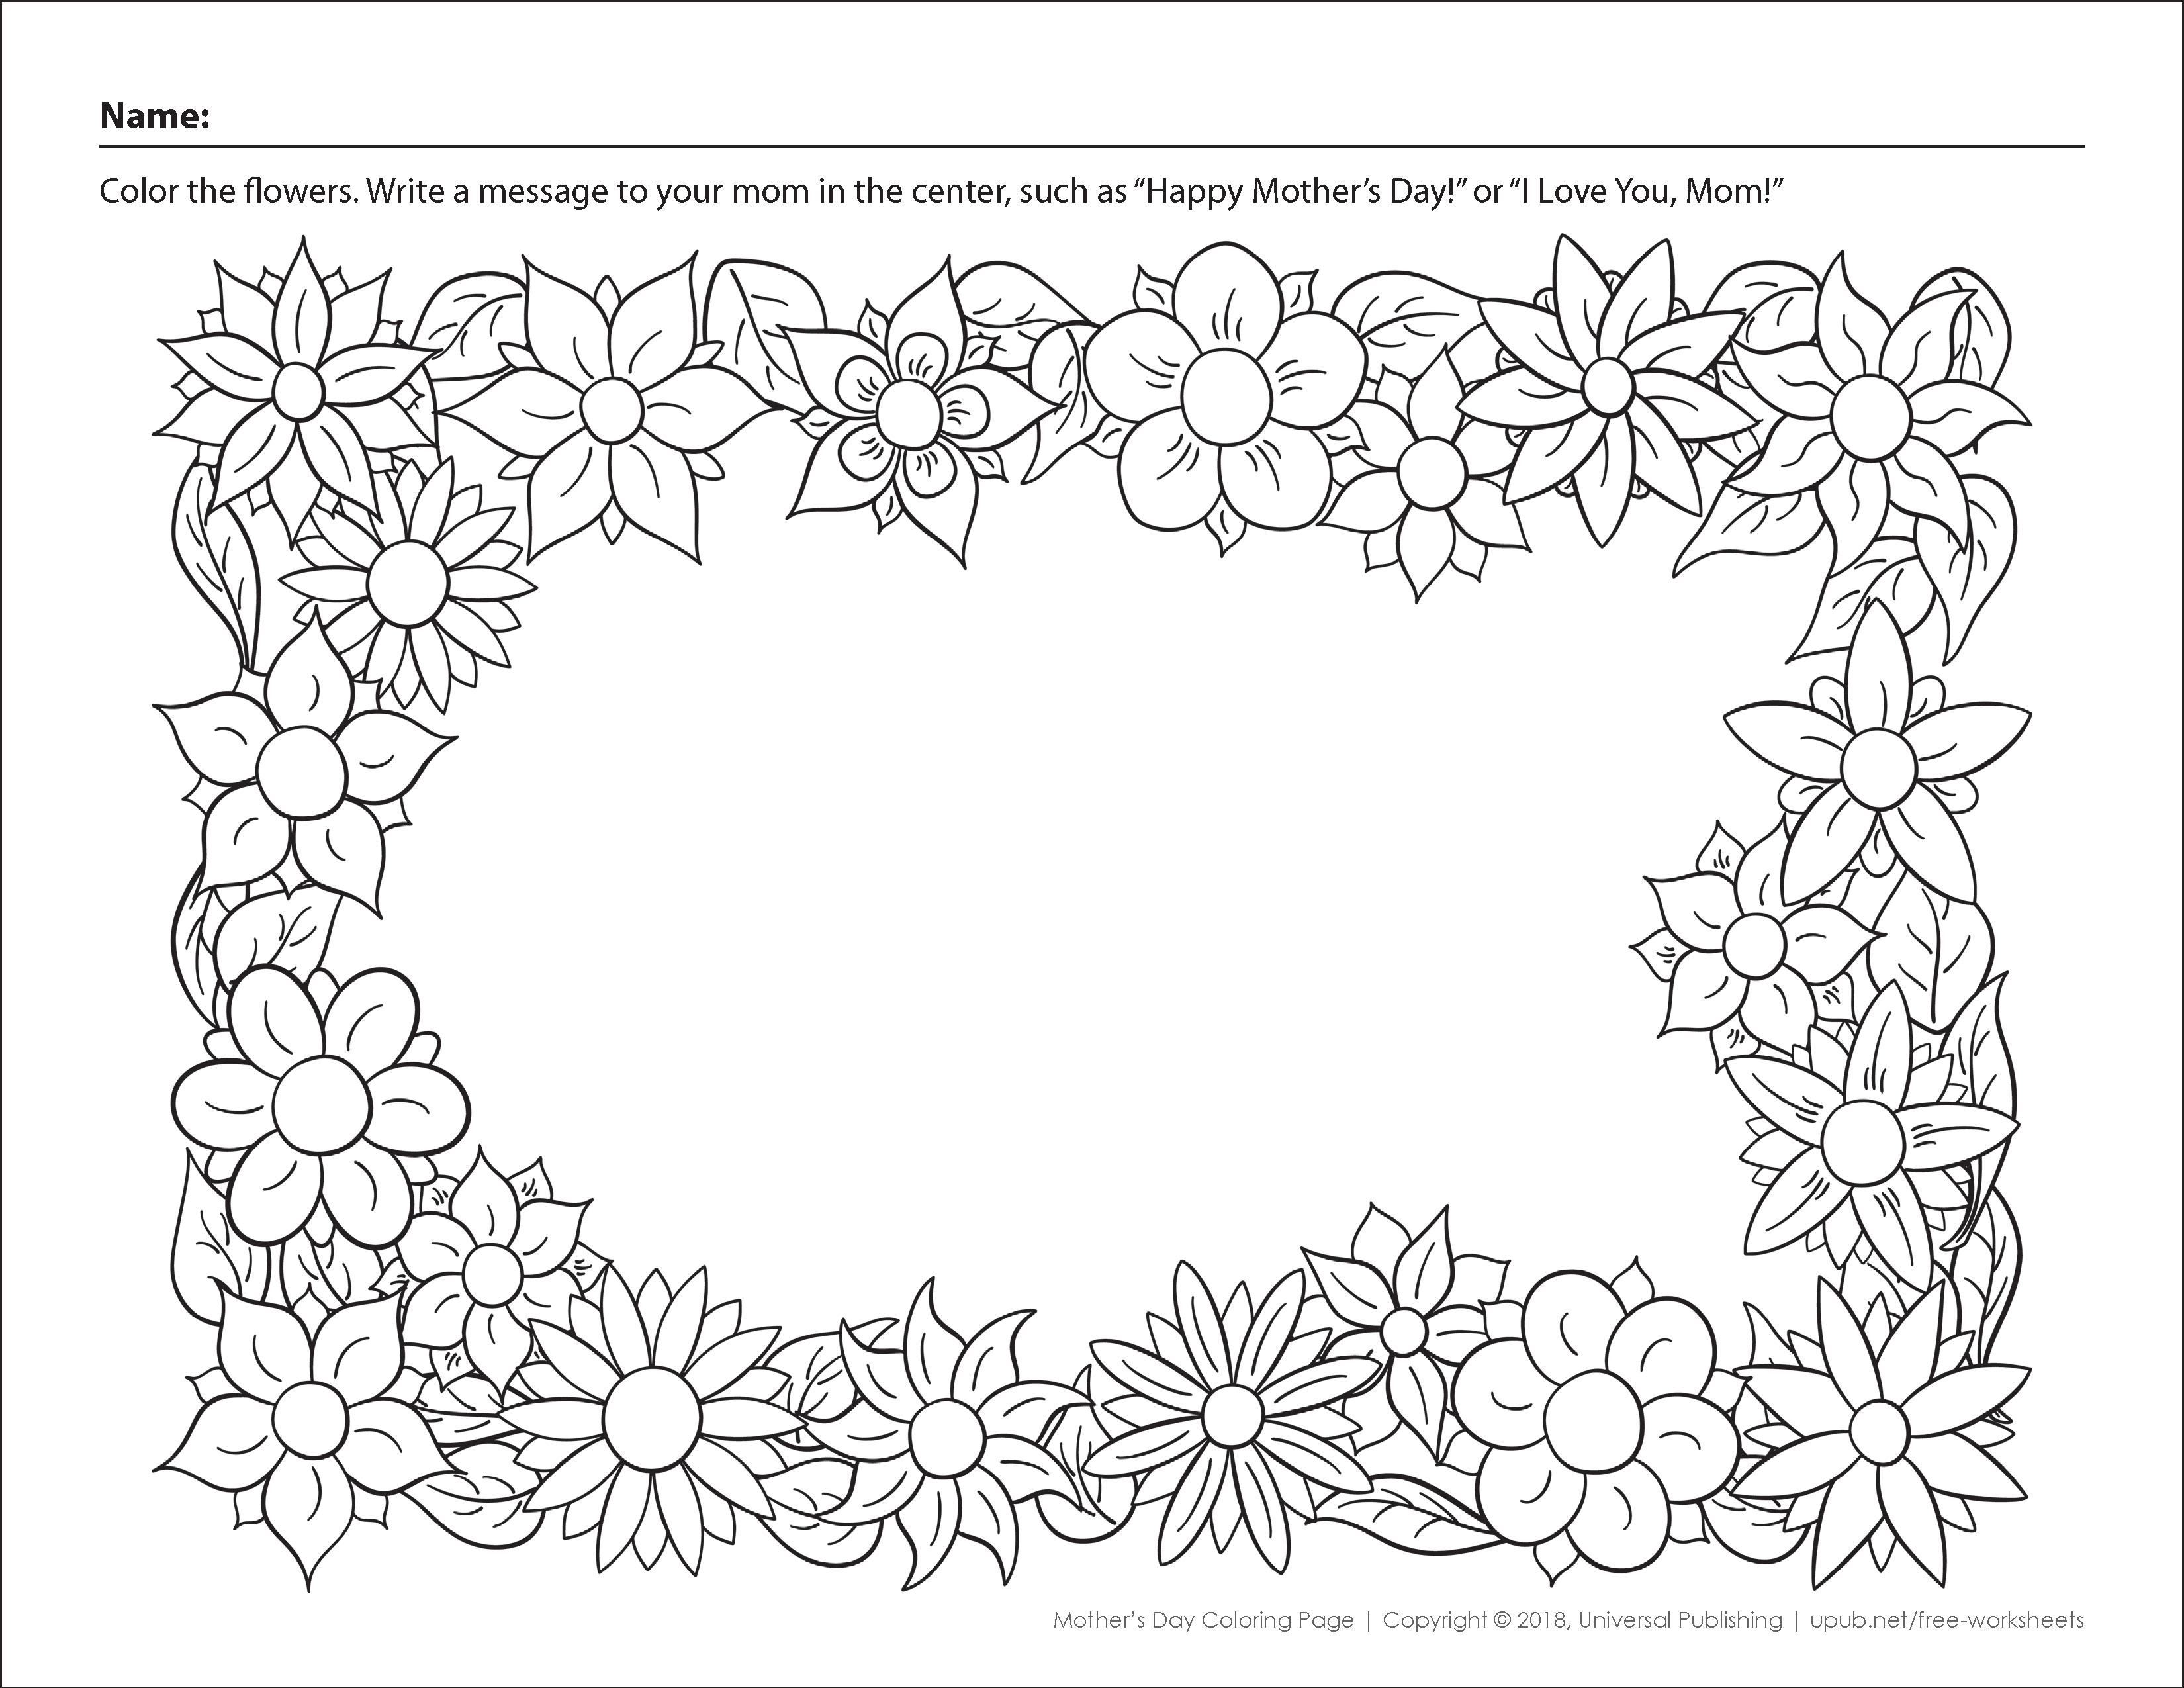 Mother's Day Coloring Page - Universal Publishing Blog